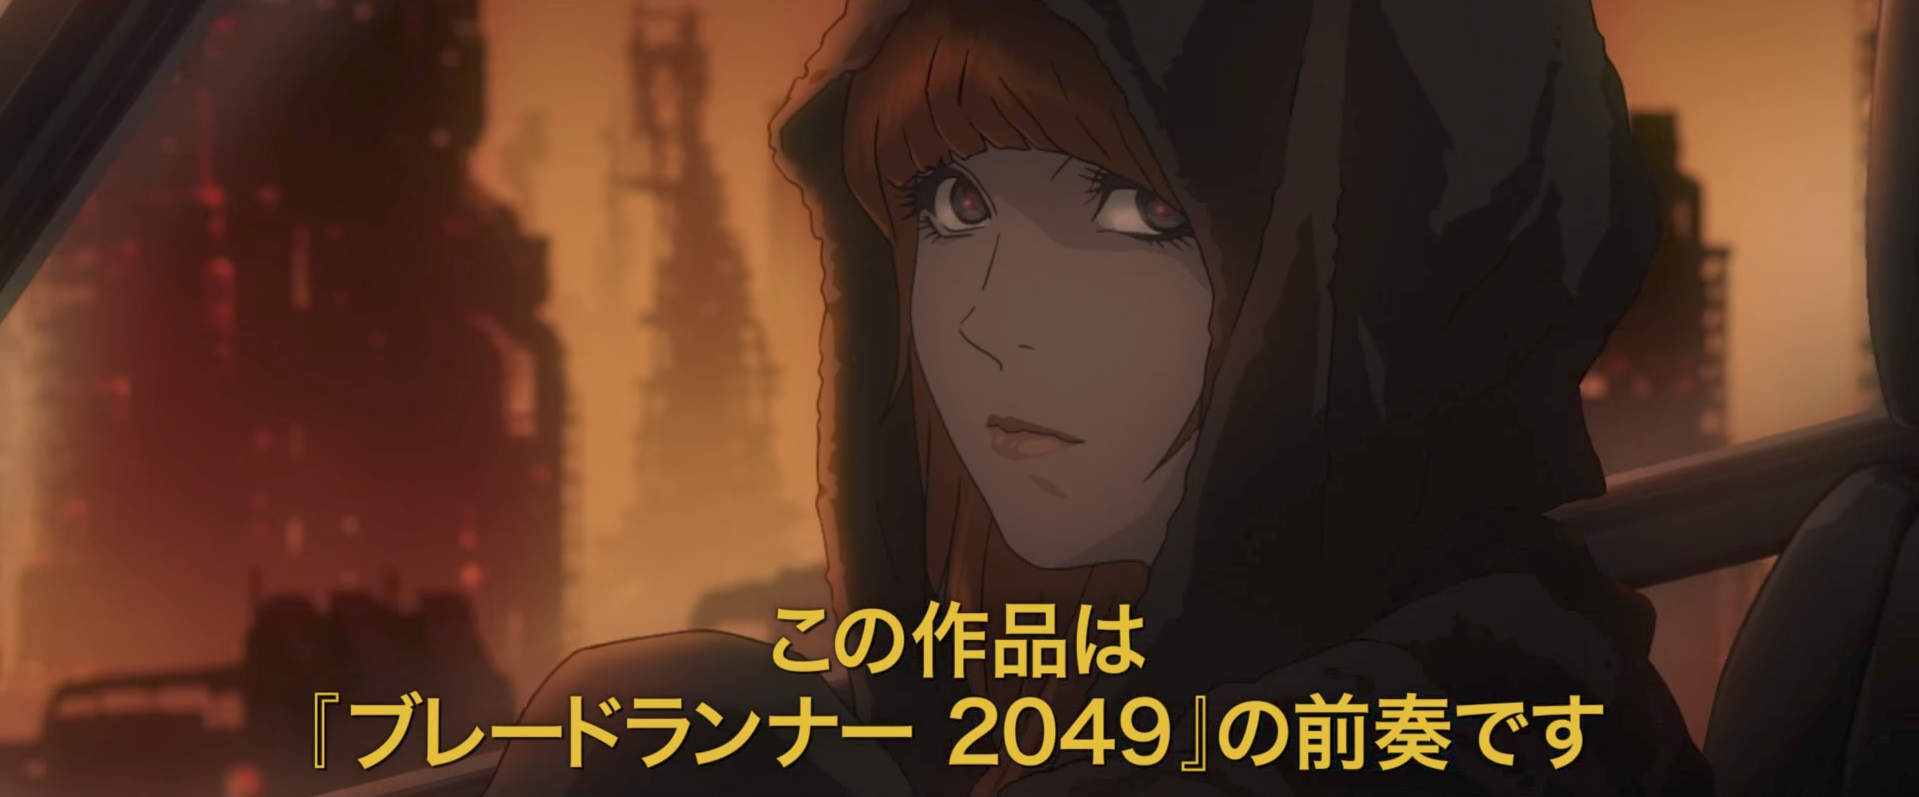 Blade Runner Is Getting A Short Anime From Cowboy Bebop’s Director